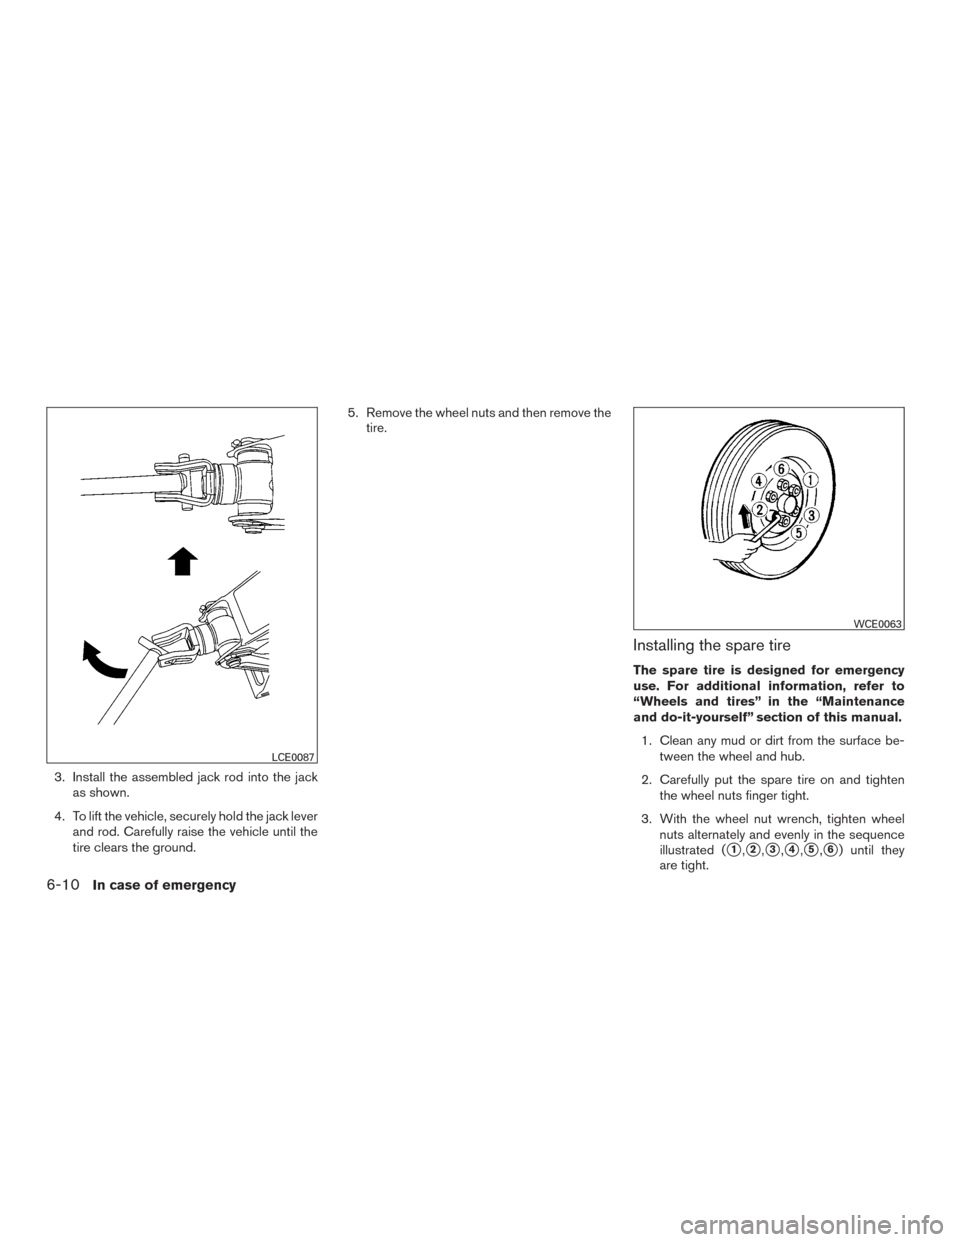 NISSAN FRONTIER 2016 D23 / 3.G User Guide 3. Install the assembled jack rod into the jackas shown.
4. To lift the vehicle, securely hold the jack lever and rod. Carefully raise the vehicle until the
tire clears the ground. 5. Remove the wheel